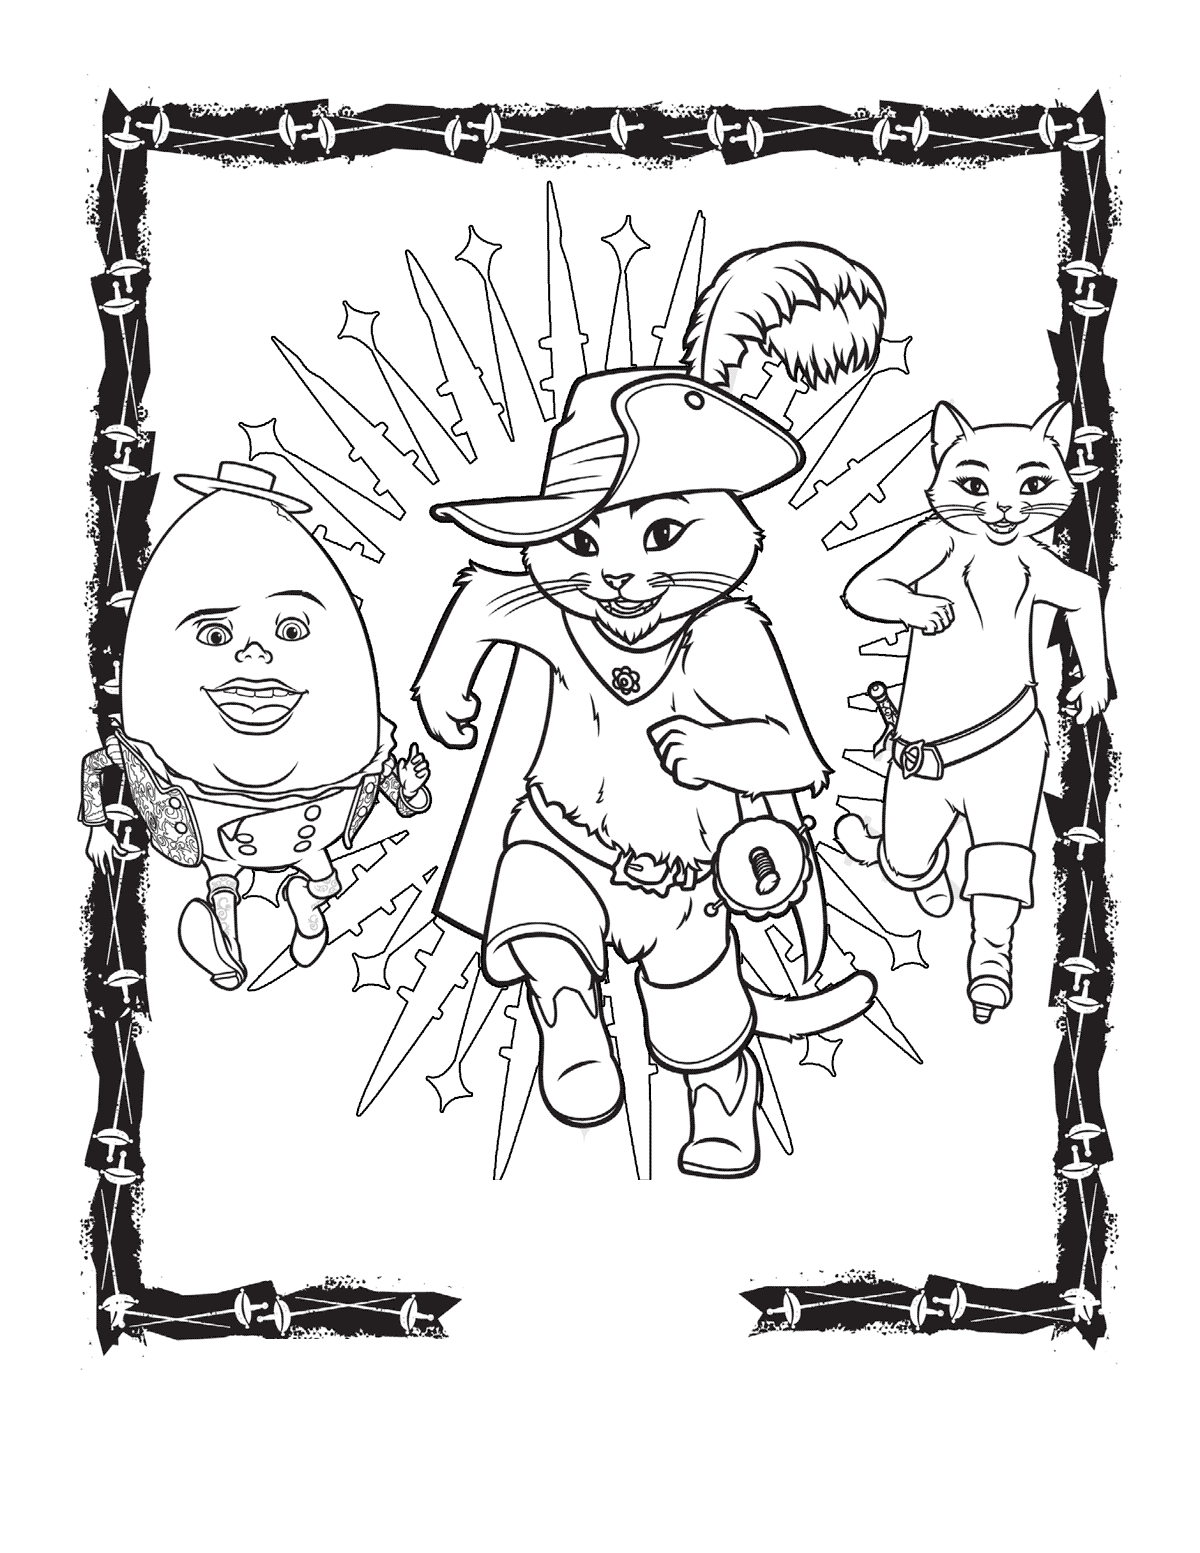 Coloring page - Adventures of Puss in Boots